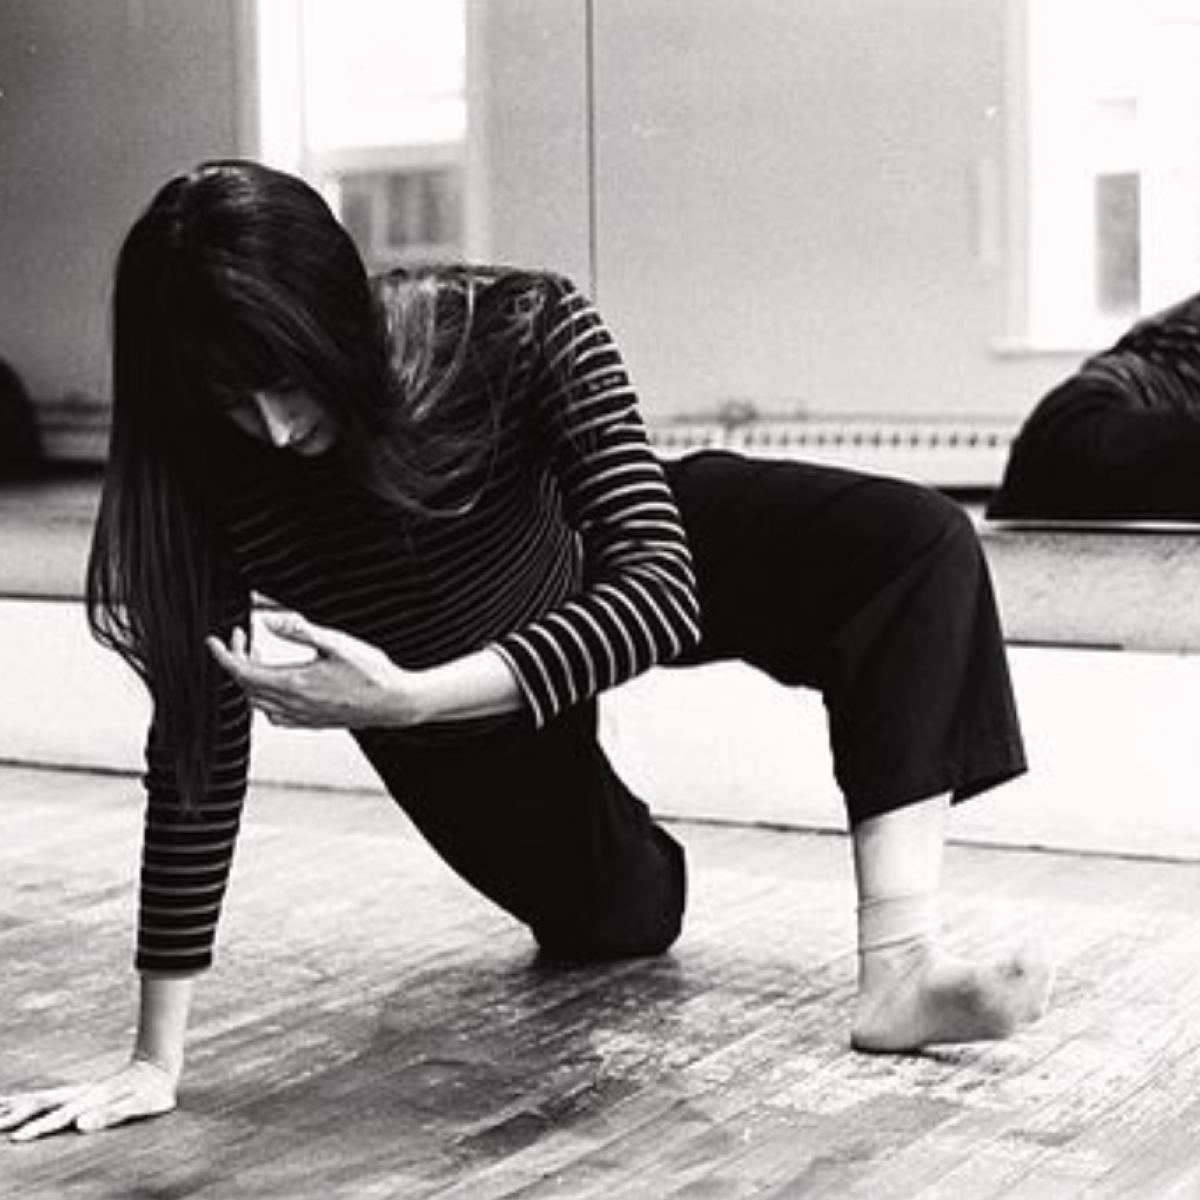 Black and white image of Lauren in a bright dance studio. They have long hair and are dressed in stripes. They are peeling themselves up from the ground which you also see in the mirror behind them.